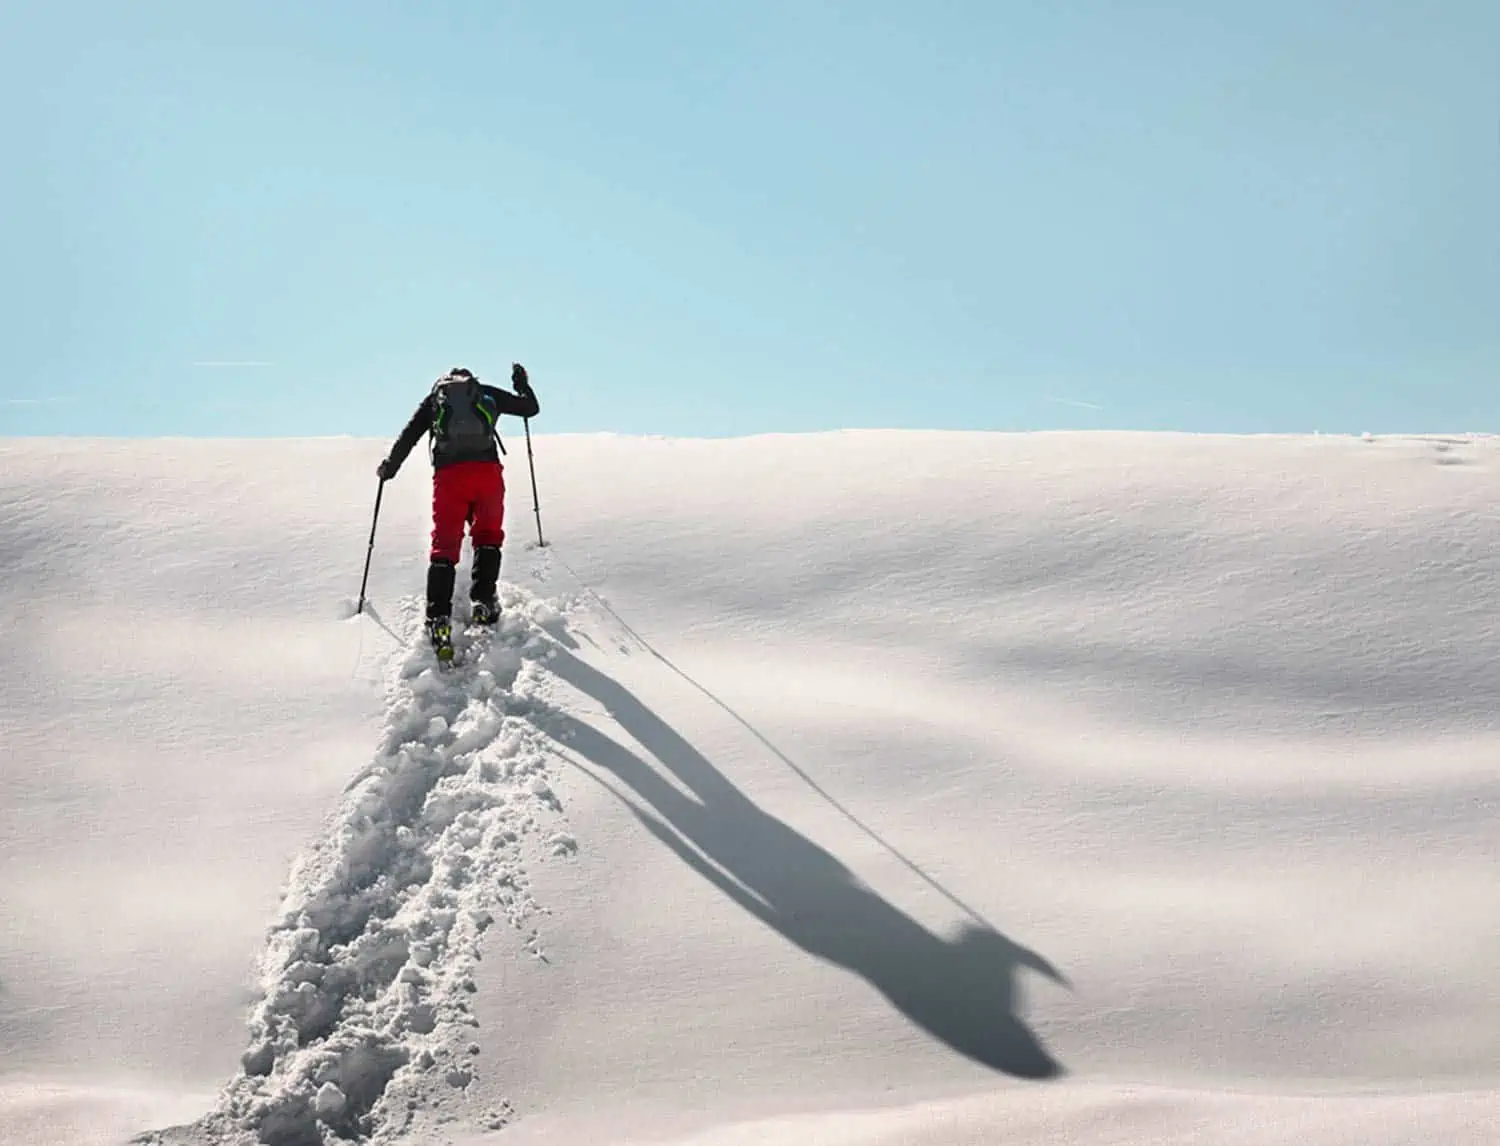 trekking poles being used in the snow